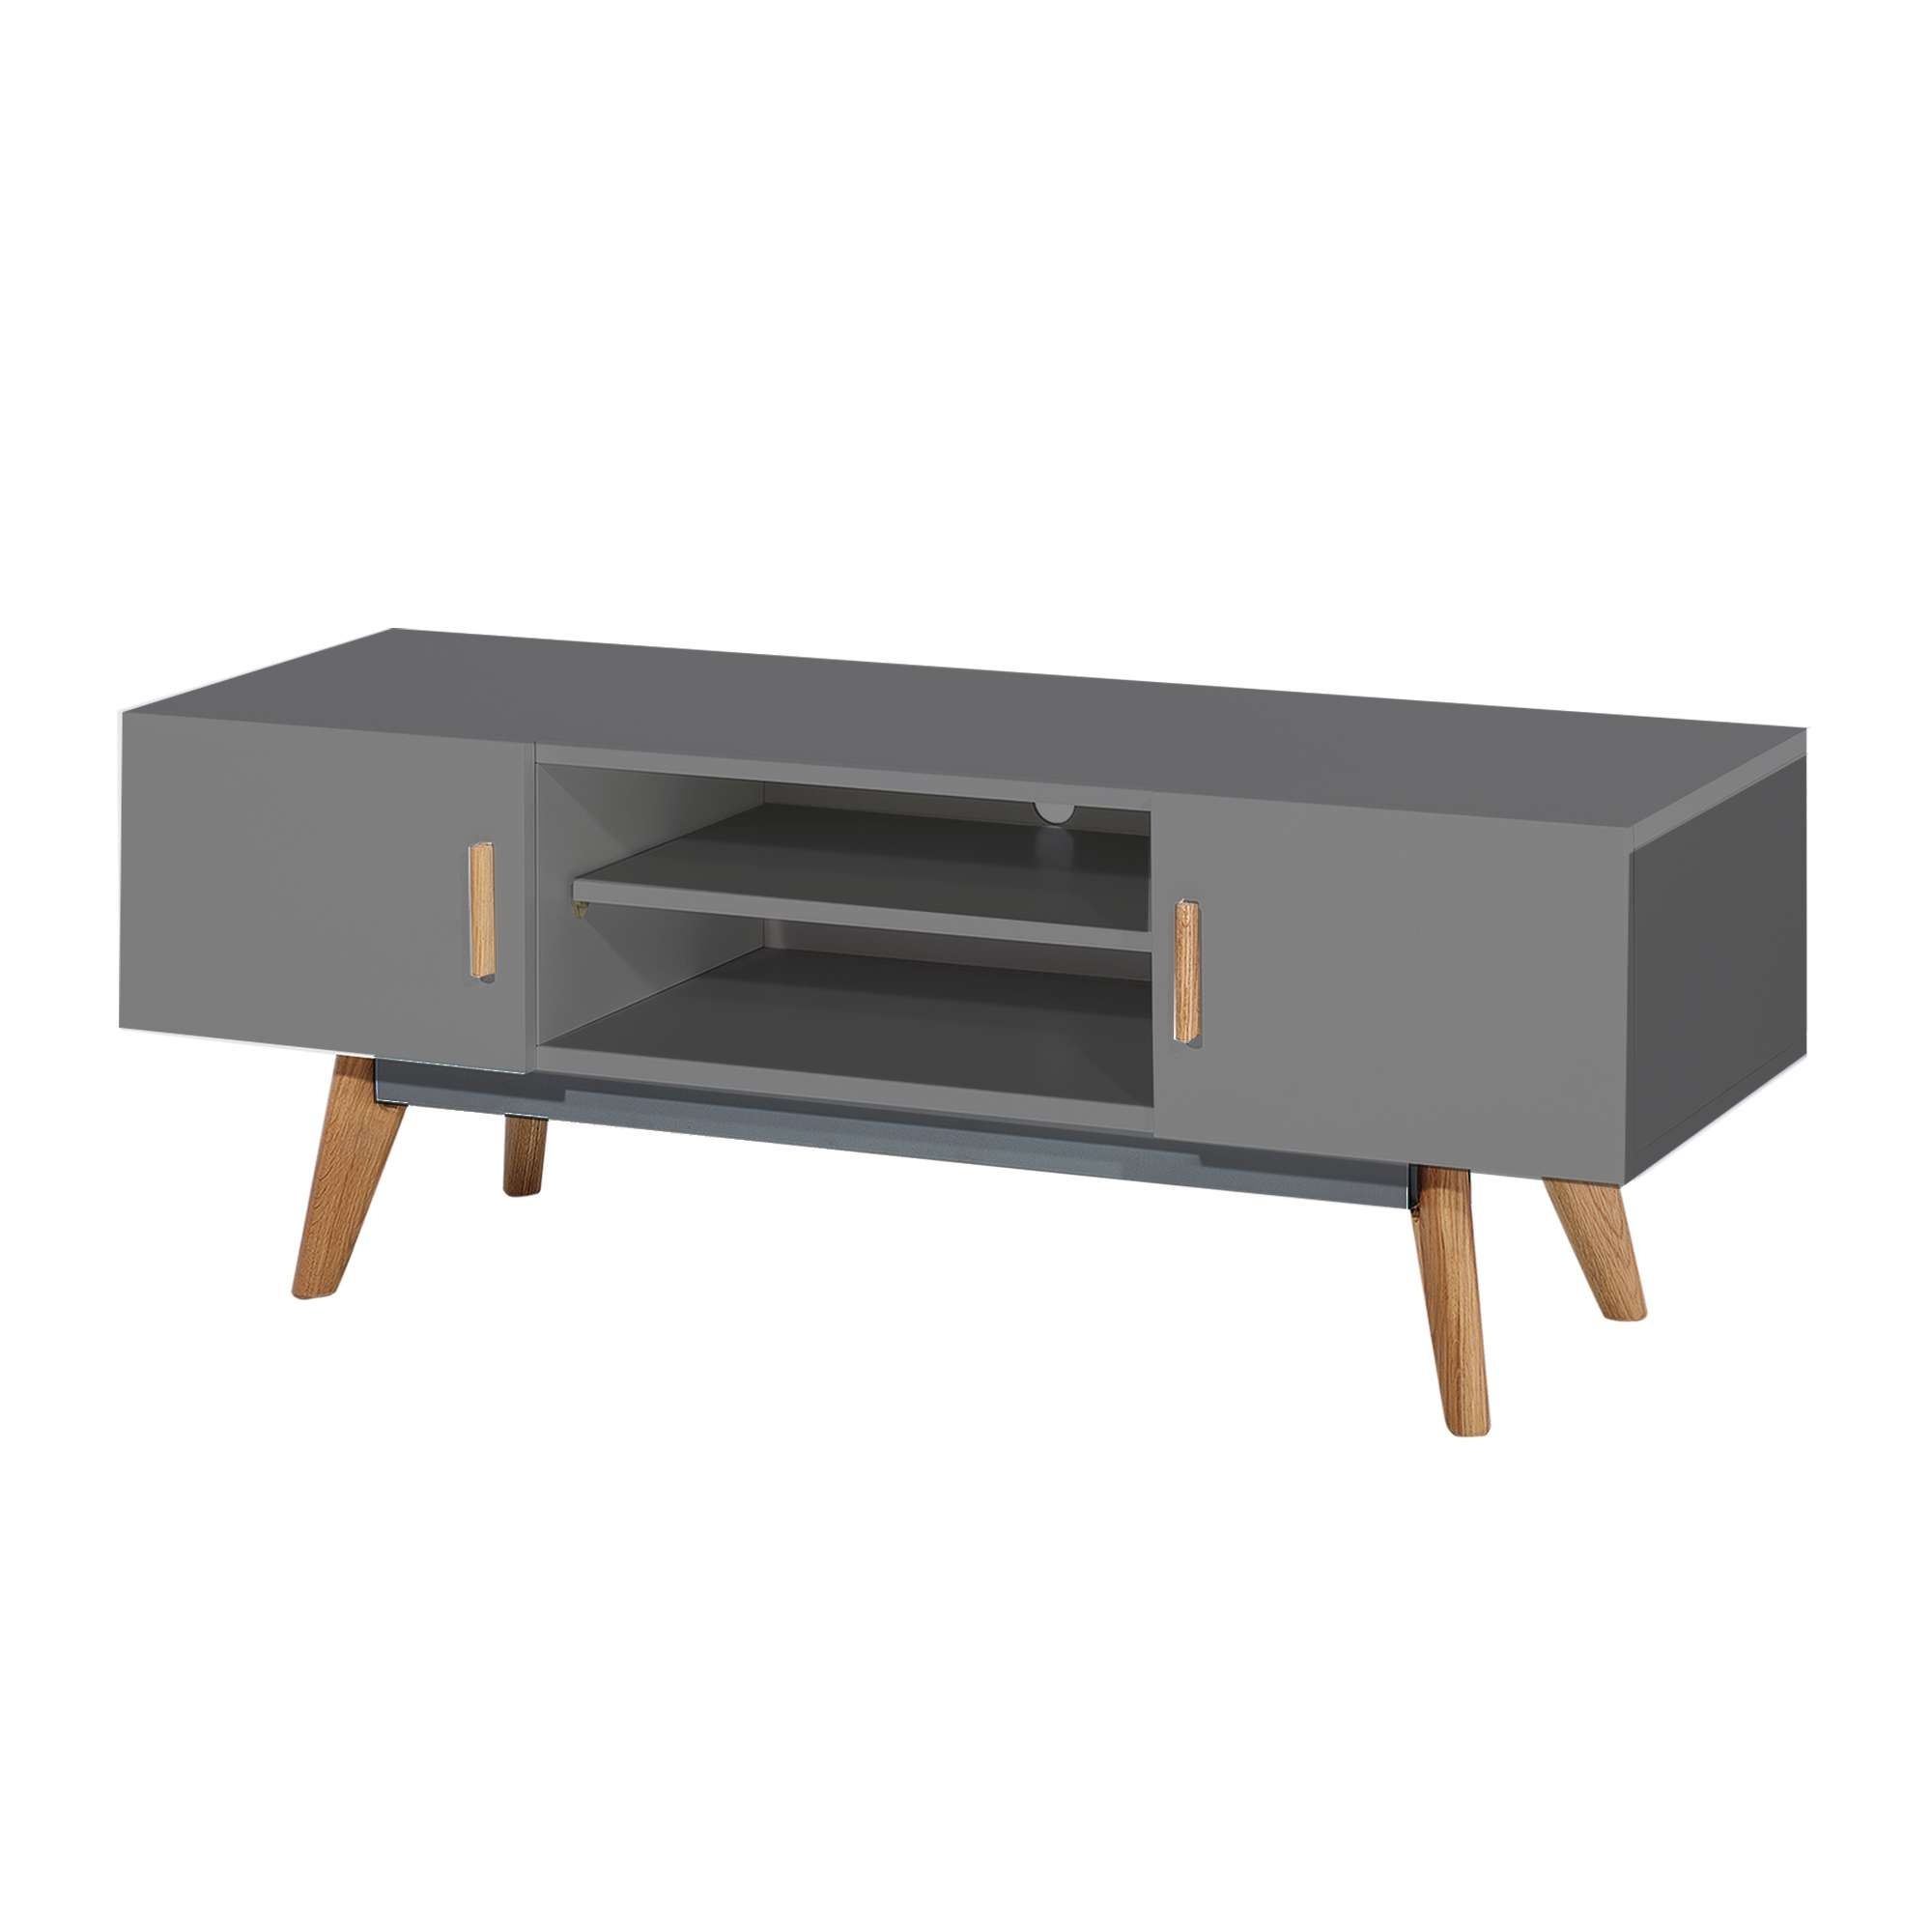 Stylish White Modern Tv Stand From Abreo Abreo Home Furniture Inside Grey Tv Stands (View 1 of 15)